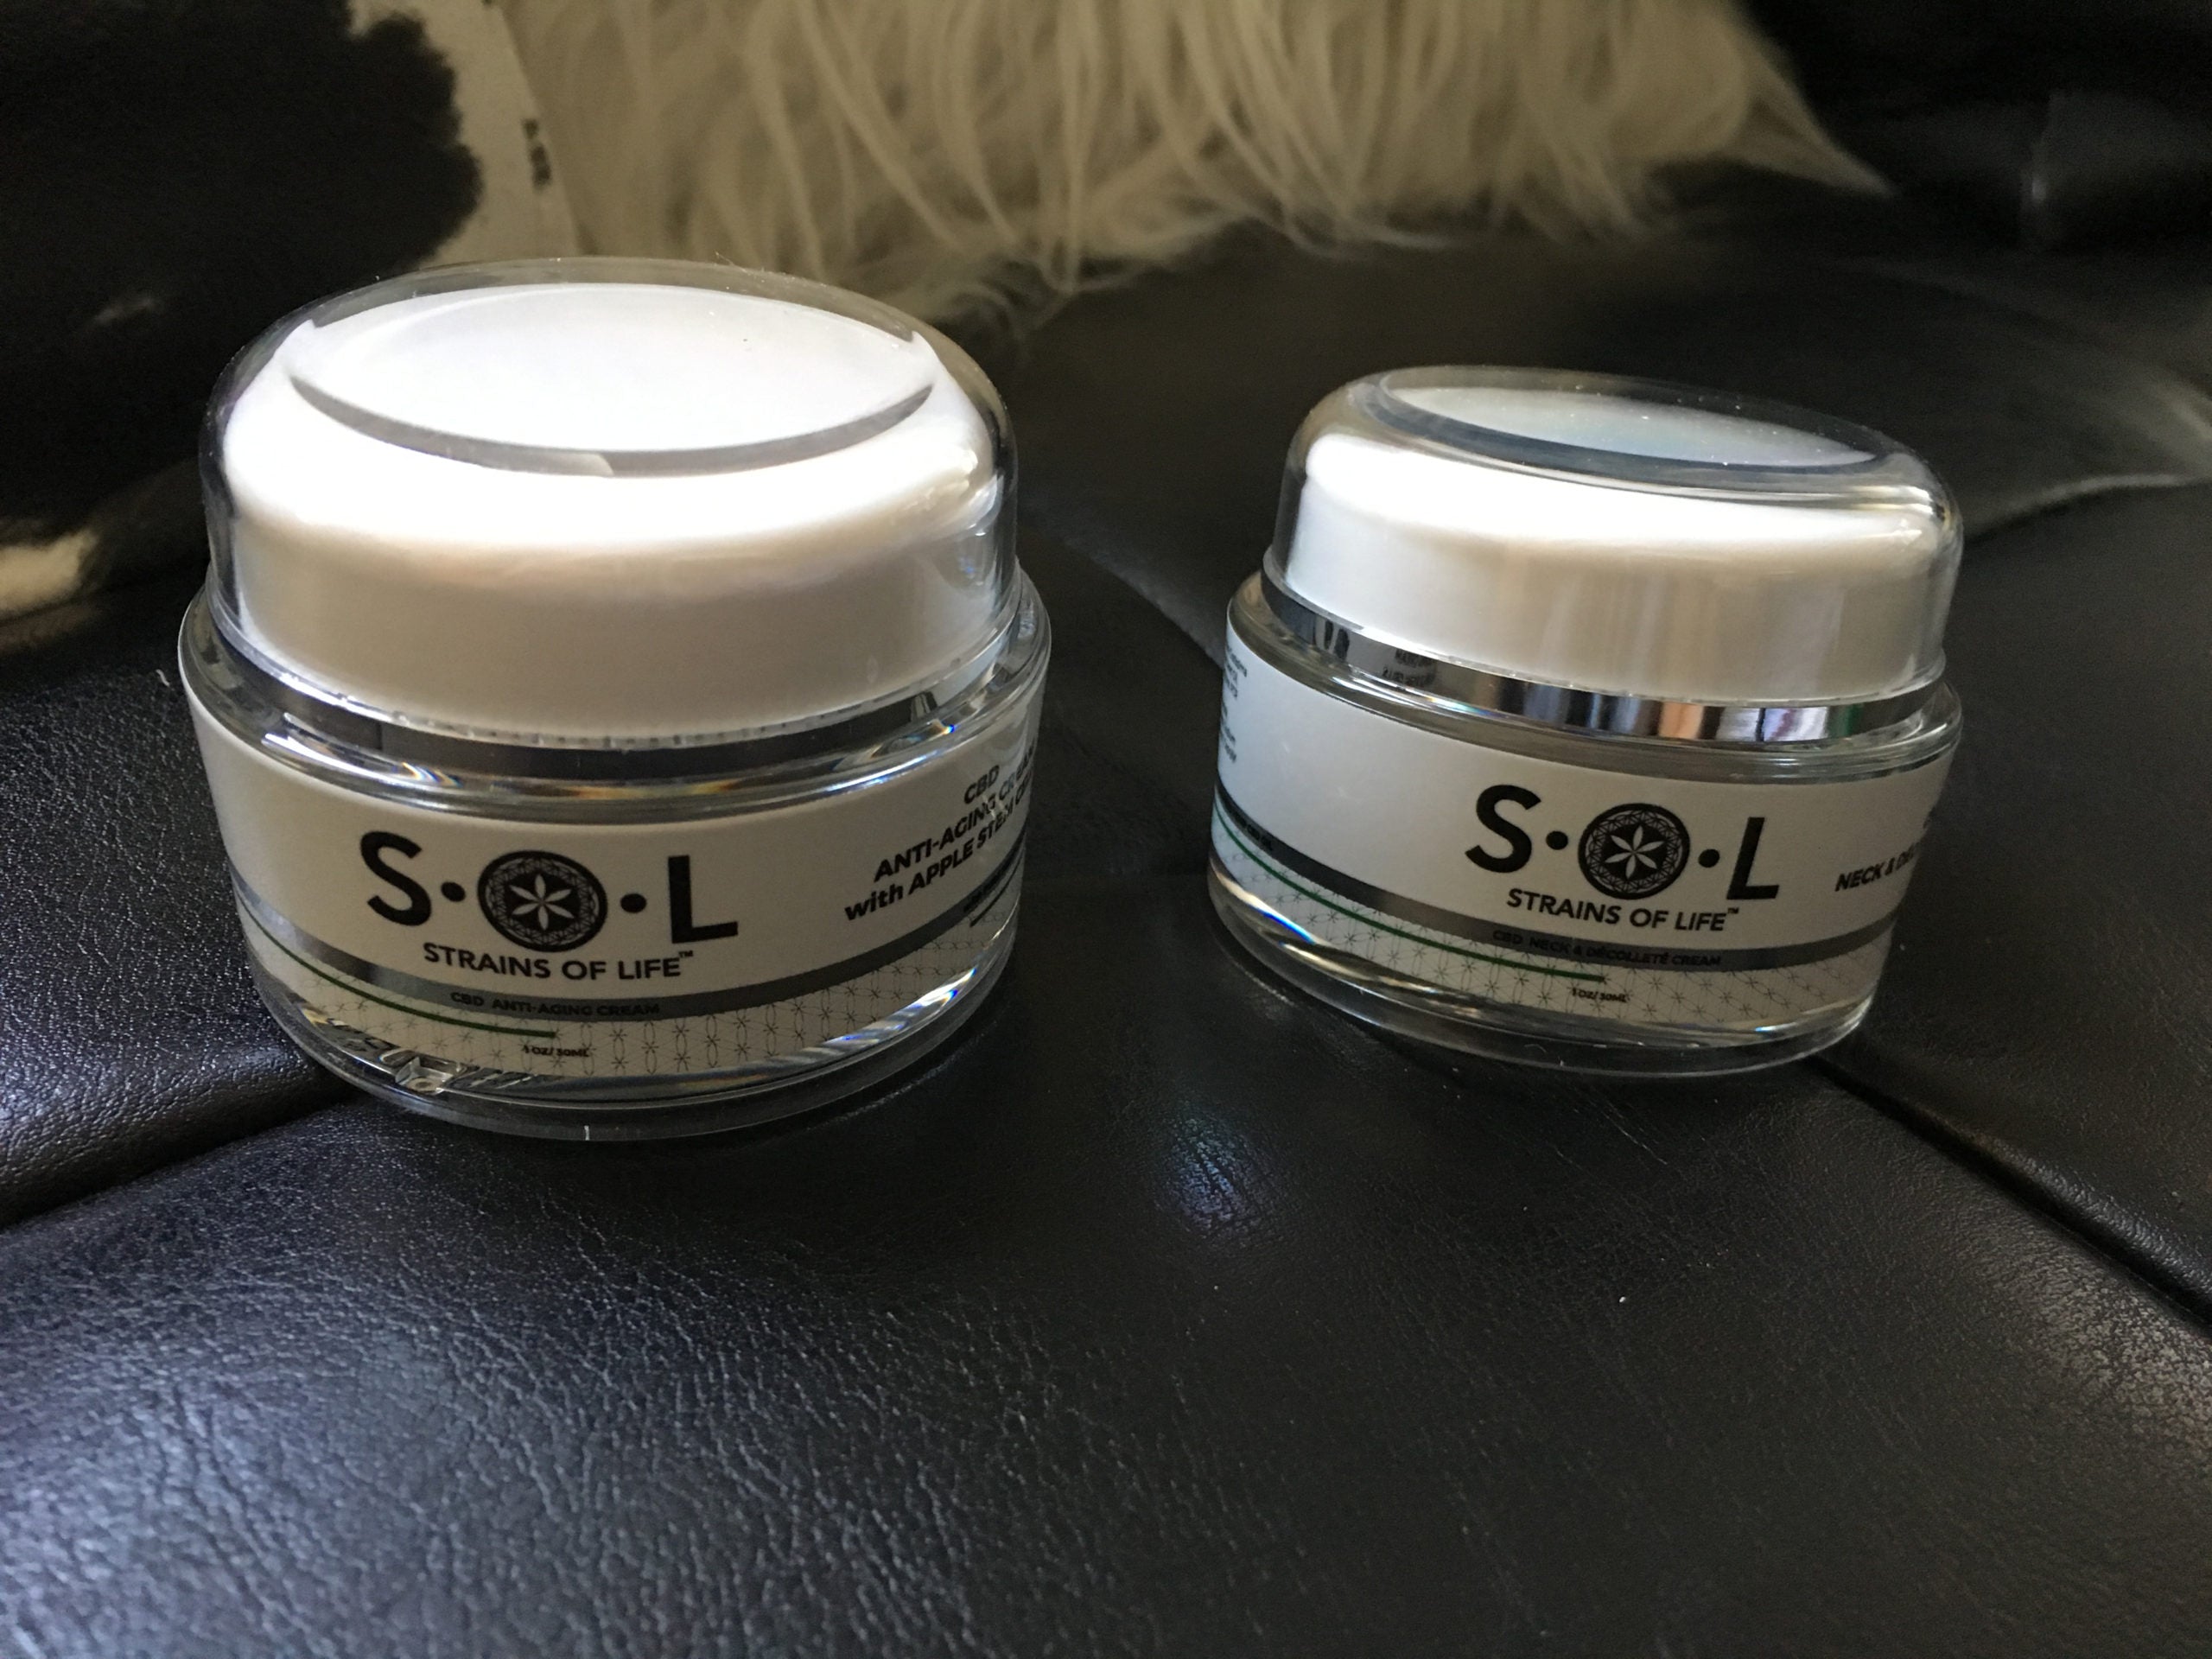 Review, Ingredients, Photos, Skincare Trend, 2019, 2020: SOL Strains of Life CBD Anti-Aging Cream with Apple Stem Cells, Neck & Decollete Cream, Best CBD Skincare Products